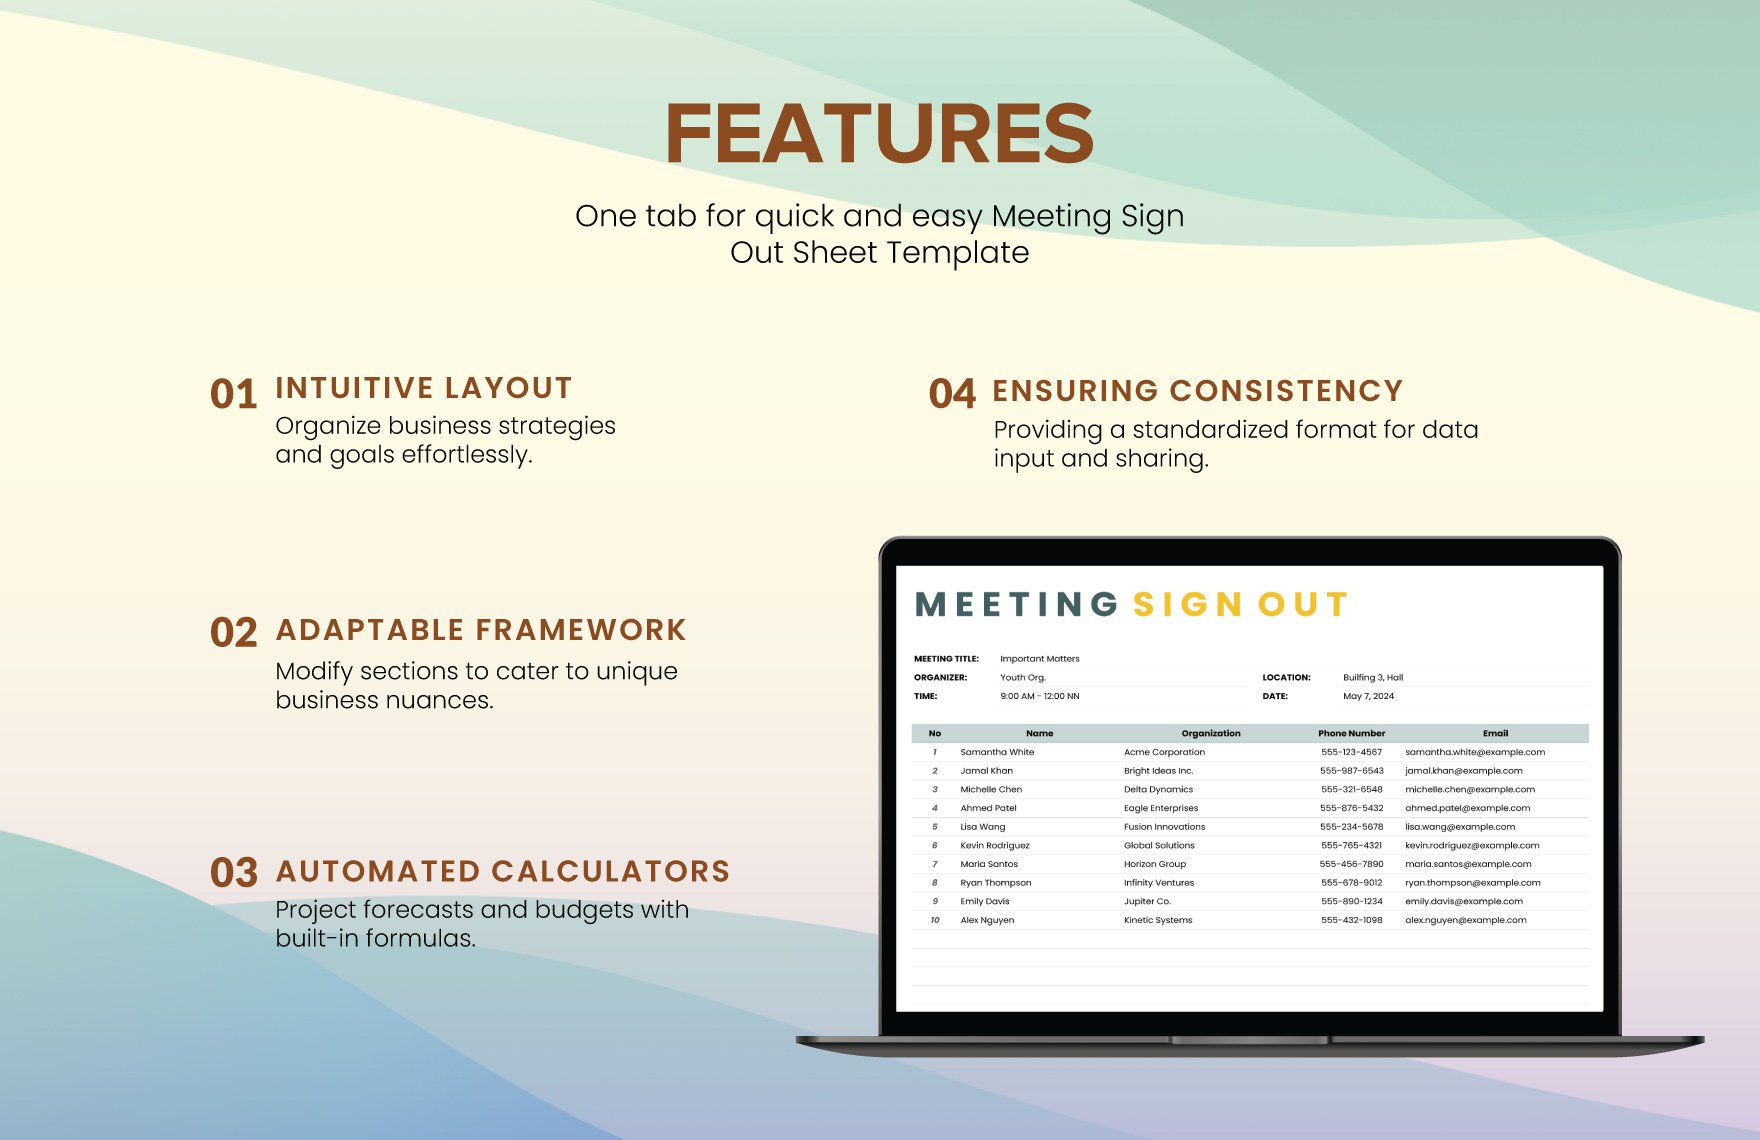 Meeting Sign Out Sheet Template